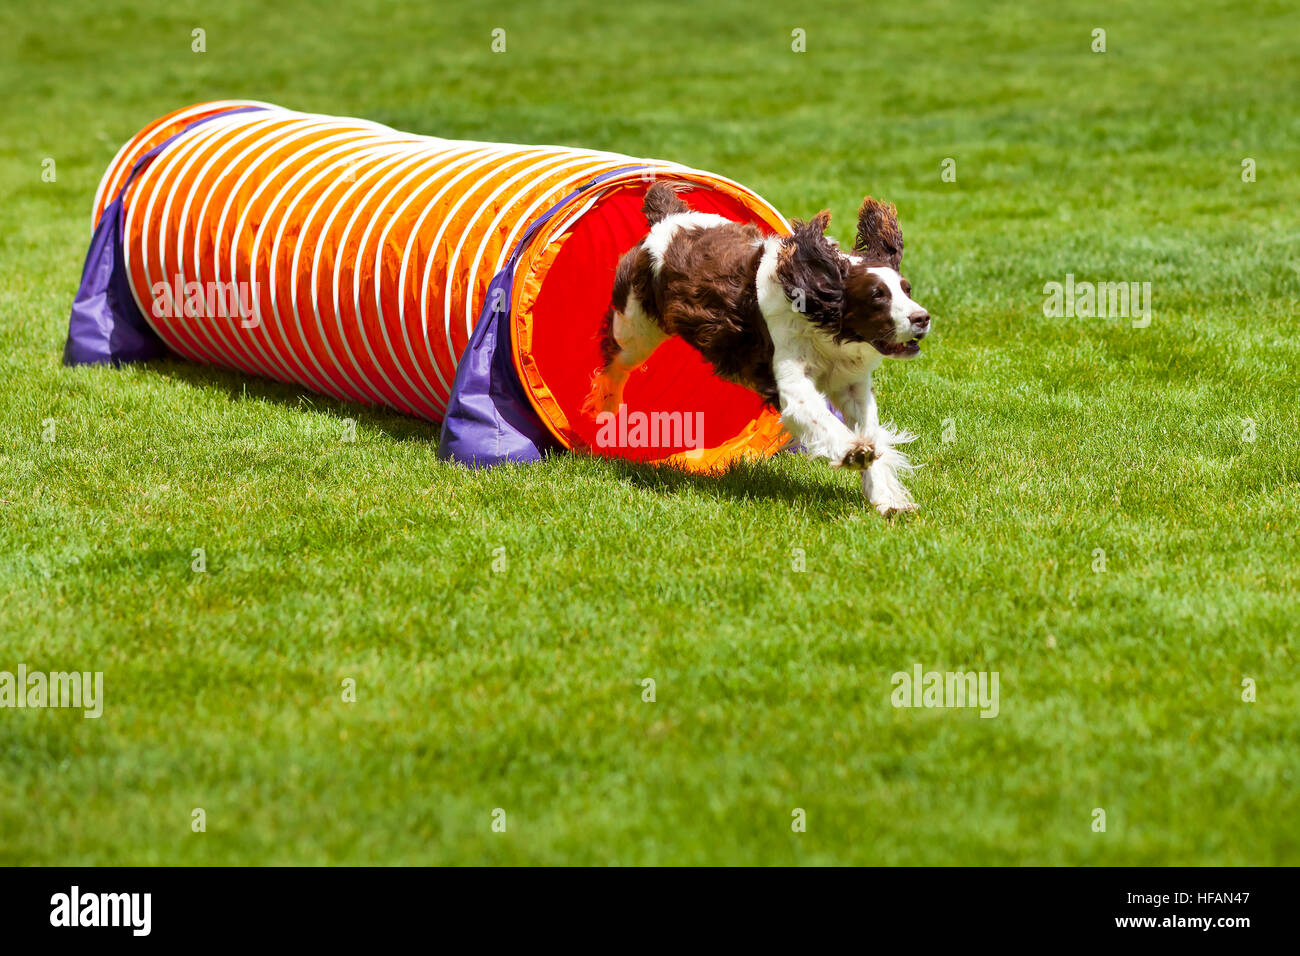 Agility Dog running out of tube. Stock Photo